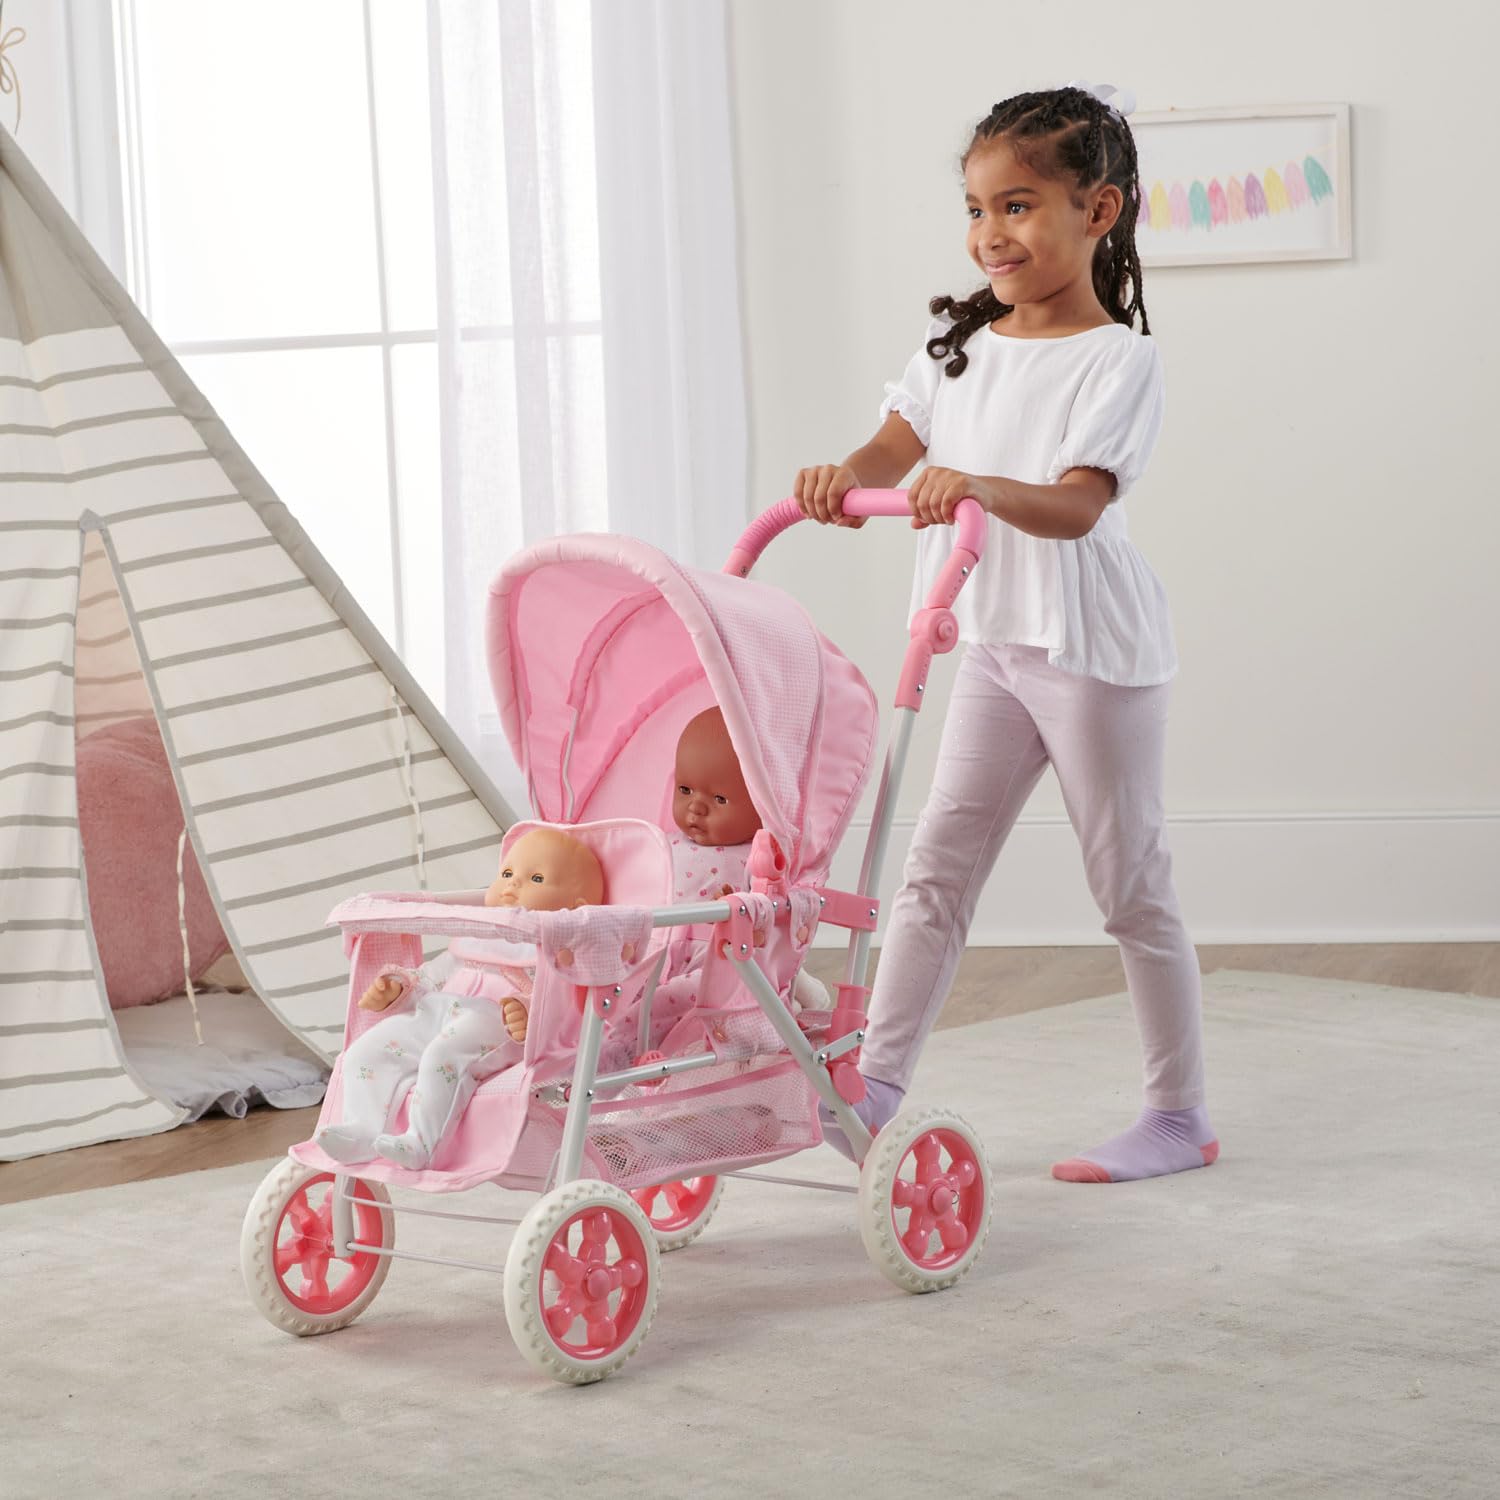 Badger Basket Toy Doll Folding Front-to-Back Double Stroller with Canopy for 18 inch Dolls - Pink/Gingham